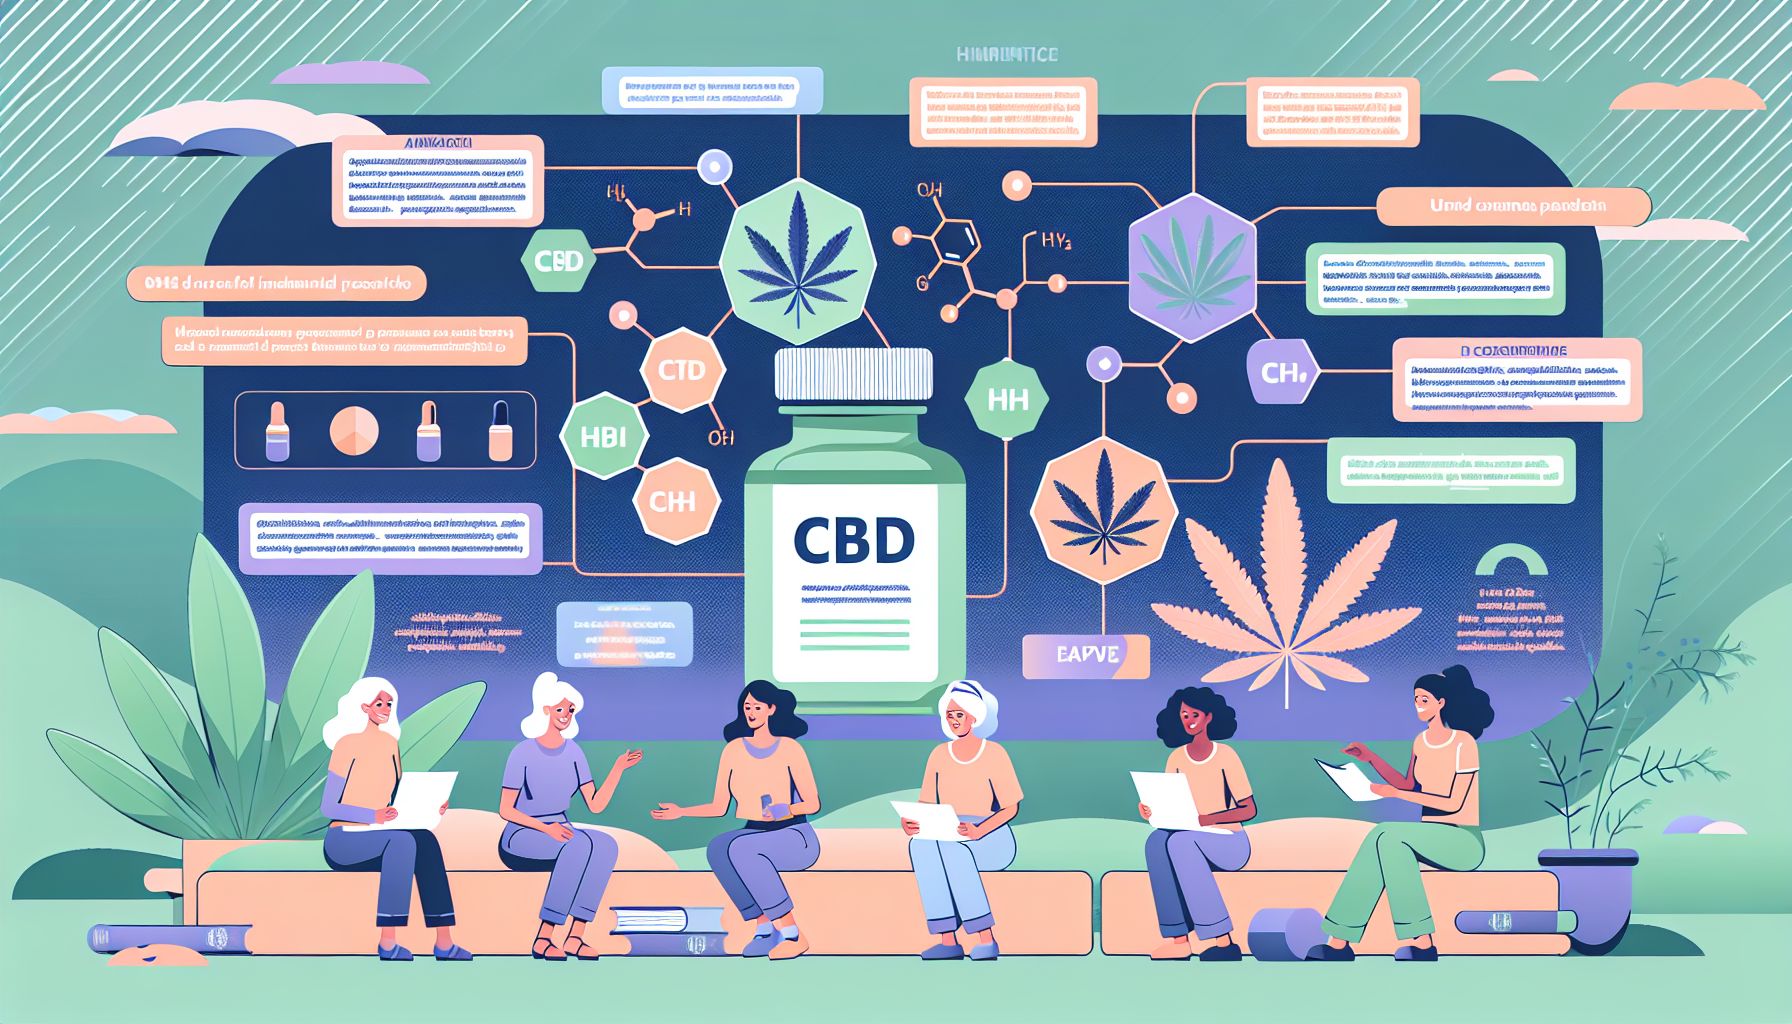 CBD for Middle Aged Women: A Look at the Latest Research and Trends